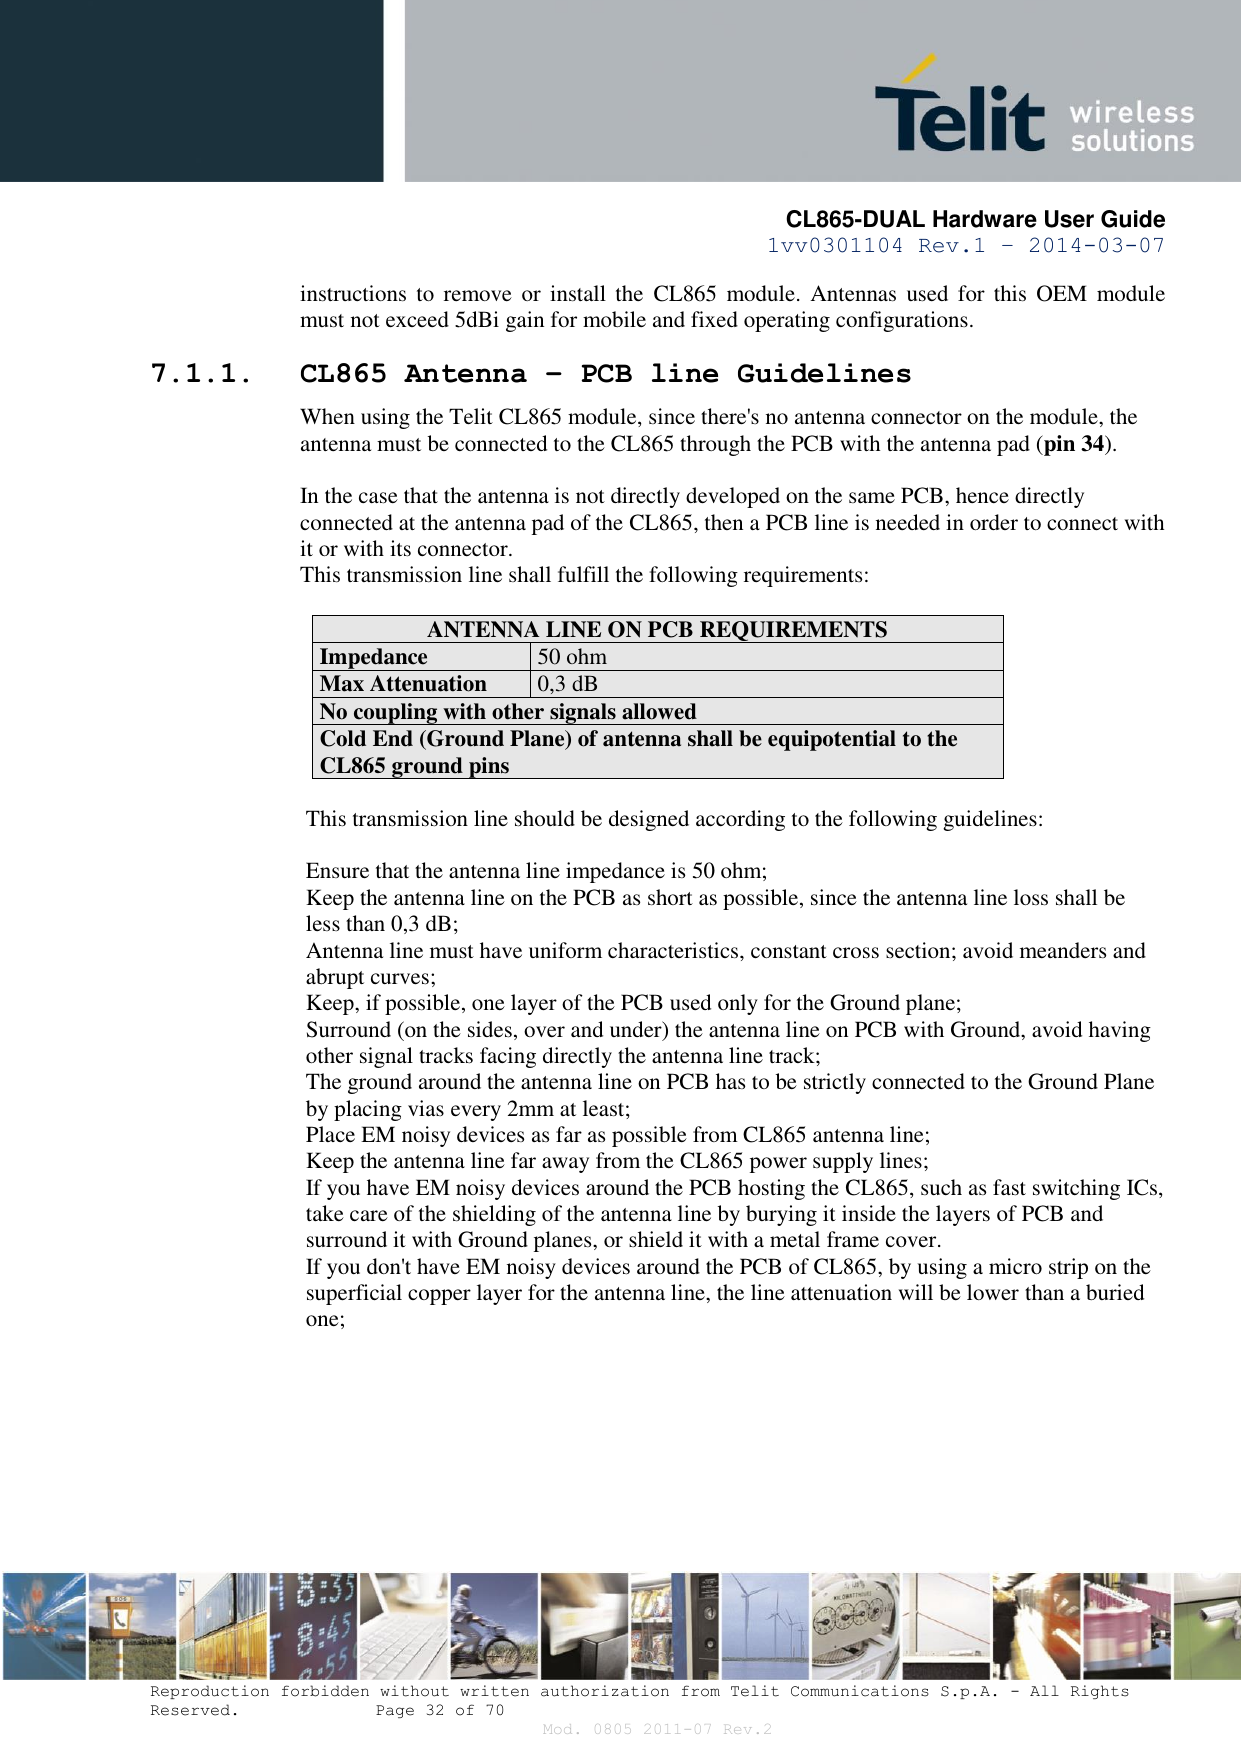       CL865-DUAL Hardware User Guide 1vv0301104 Rev.1 – 2014-03-07  Reproduction forbidden without written authorization from Telit Communications S.p.A. - All Rights Reserved.    Page 32 of 70 Mod. 0805 2011-07 Rev.2 instructions to  remove or  install  the  CL865  module. Antennas  used for  this  OEM  module must not exceed 5dBi gain for mobile and fixed operating configurations. 7.1.1. CL865 Antenna – PCB line Guidelines When using the Telit CL865 module, since there&apos;s no antenna connector on the module, the antenna must be connected to the CL865 through the PCB with the antenna pad (pin 34).  In the case that the antenna is not directly developed on the same PCB, hence directly connected at the antenna pad of the CL865, then a PCB line is needed in order to connect with it or with its connector.  This transmission line shall fulfill the following requirements:  ANTENNA LINE ON PCB REQUIREMENTS Impedance 50 ohm Max Attenuation 0,3 dB No coupling with other signals allowed Cold End (Ground Plane) of antenna shall be equipotential to the CL865 ground pins  This transmission line should be designed according to the following guidelines:  Ensure that the antenna line impedance is 50 ohm; Keep the antenna line on the PCB as short as possible, since the antenna line loss shall be less than 0,3 dB; Antenna line must have uniform characteristics, constant cross section; avoid meanders and abrupt curves; Keep, if possible, one layer of the PCB used only for the Ground plane; Surround (on the sides, over and under) the antenna line on PCB with Ground, avoid having other signal tracks facing directly the antenna line track; The ground around the antenna line on PCB has to be strictly connected to the Ground Plane by placing vias every 2mm at least; Place EM noisy devices as far as possible from CL865 antenna line; Keep the antenna line far away from the CL865 power supply lines; If you have EM noisy devices around the PCB hosting the CL865, such as fast switching ICs, take care of the shielding of the antenna line by burying it inside the layers of PCB and surround it with Ground planes, or shield it with a metal frame cover. If you don&apos;t have EM noisy devices around the PCB of CL865, by using a micro strip on the superficial copper layer for the antenna line, the line attenuation will be lower than a buried one;  